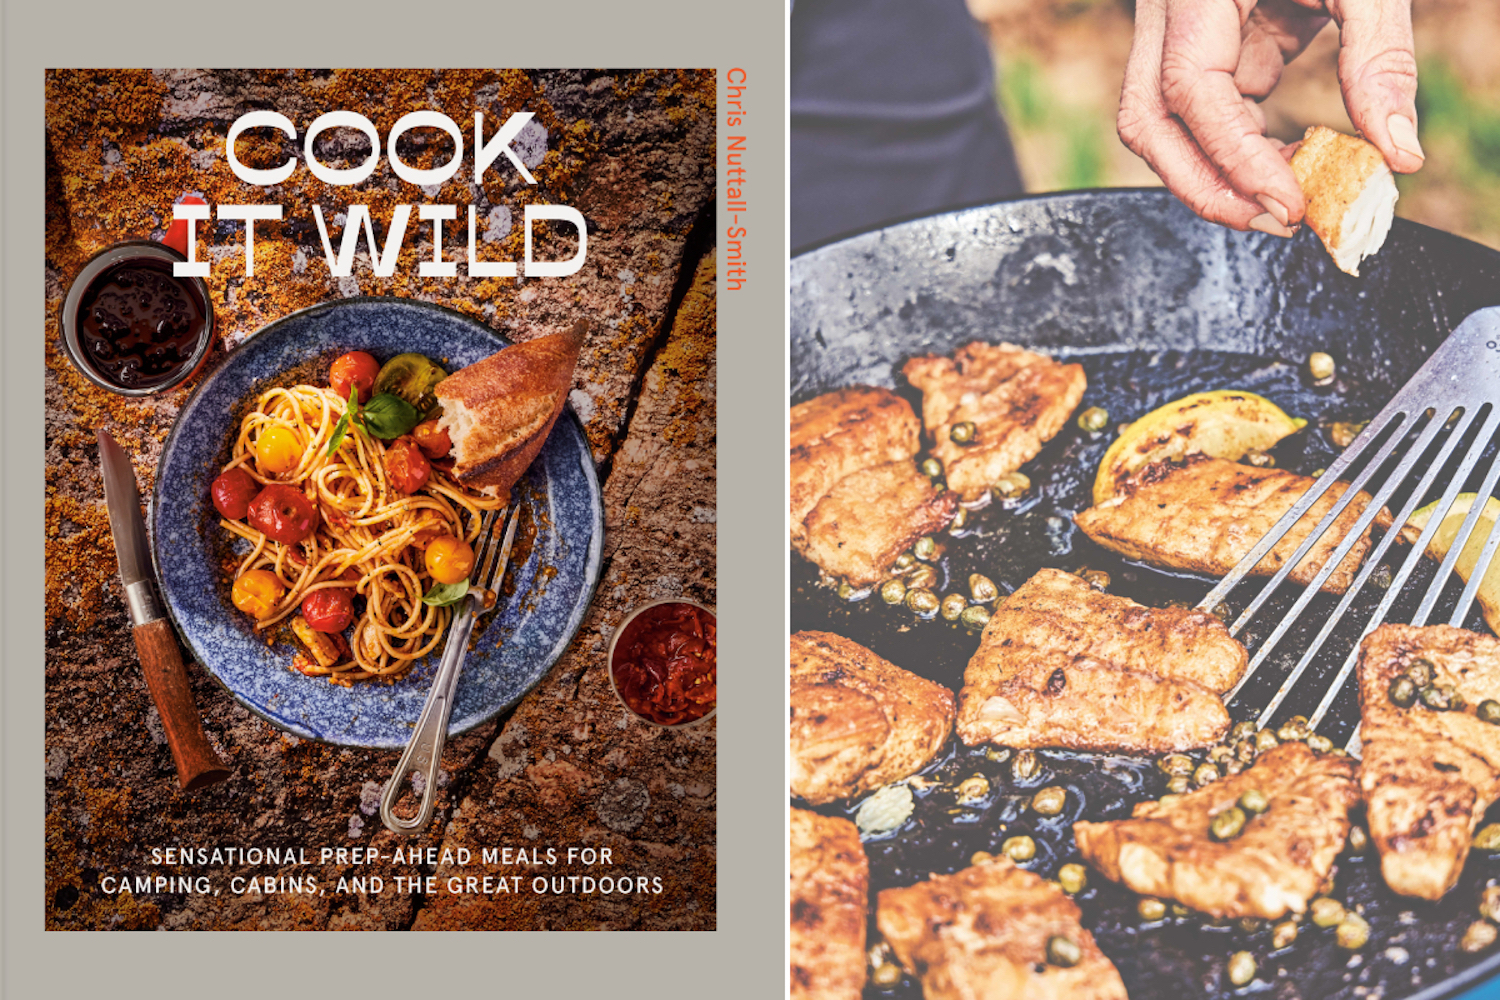 Book cover and food on a grill. Best outdoor meal